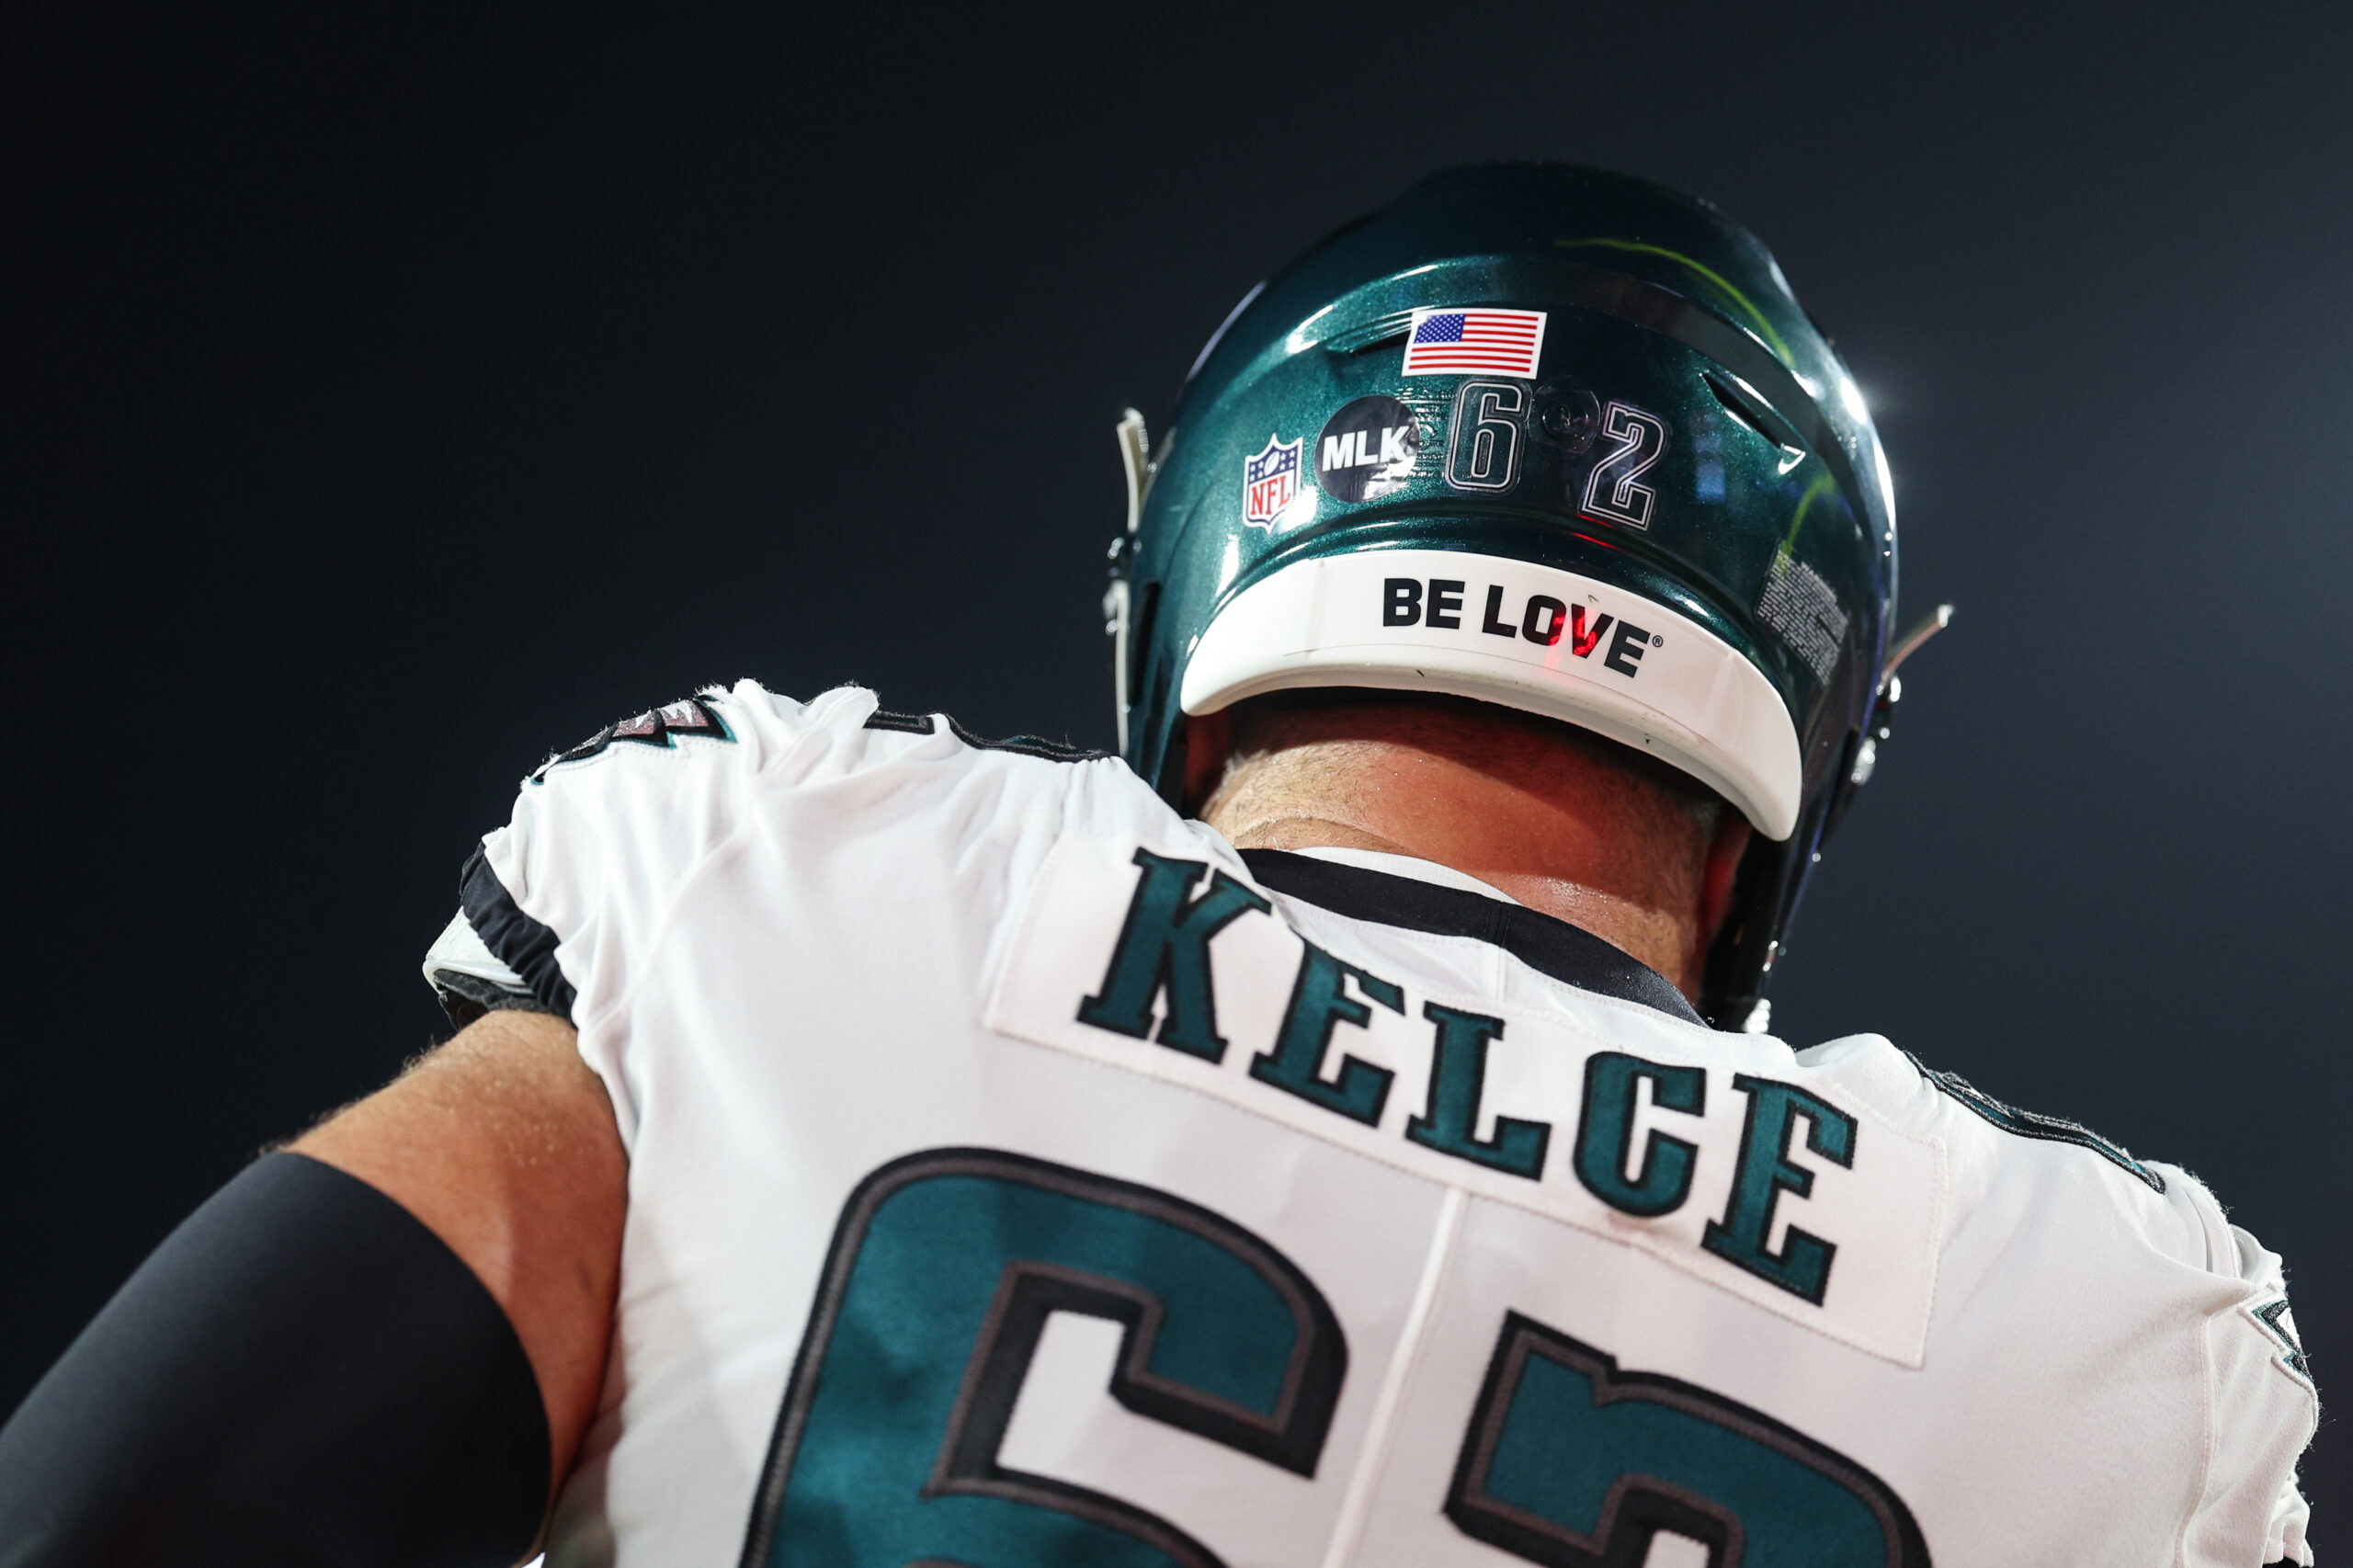 jason kelce, fletcher cox staying with eagles? gm howie roseman says “you never want to see them wearing different colors”